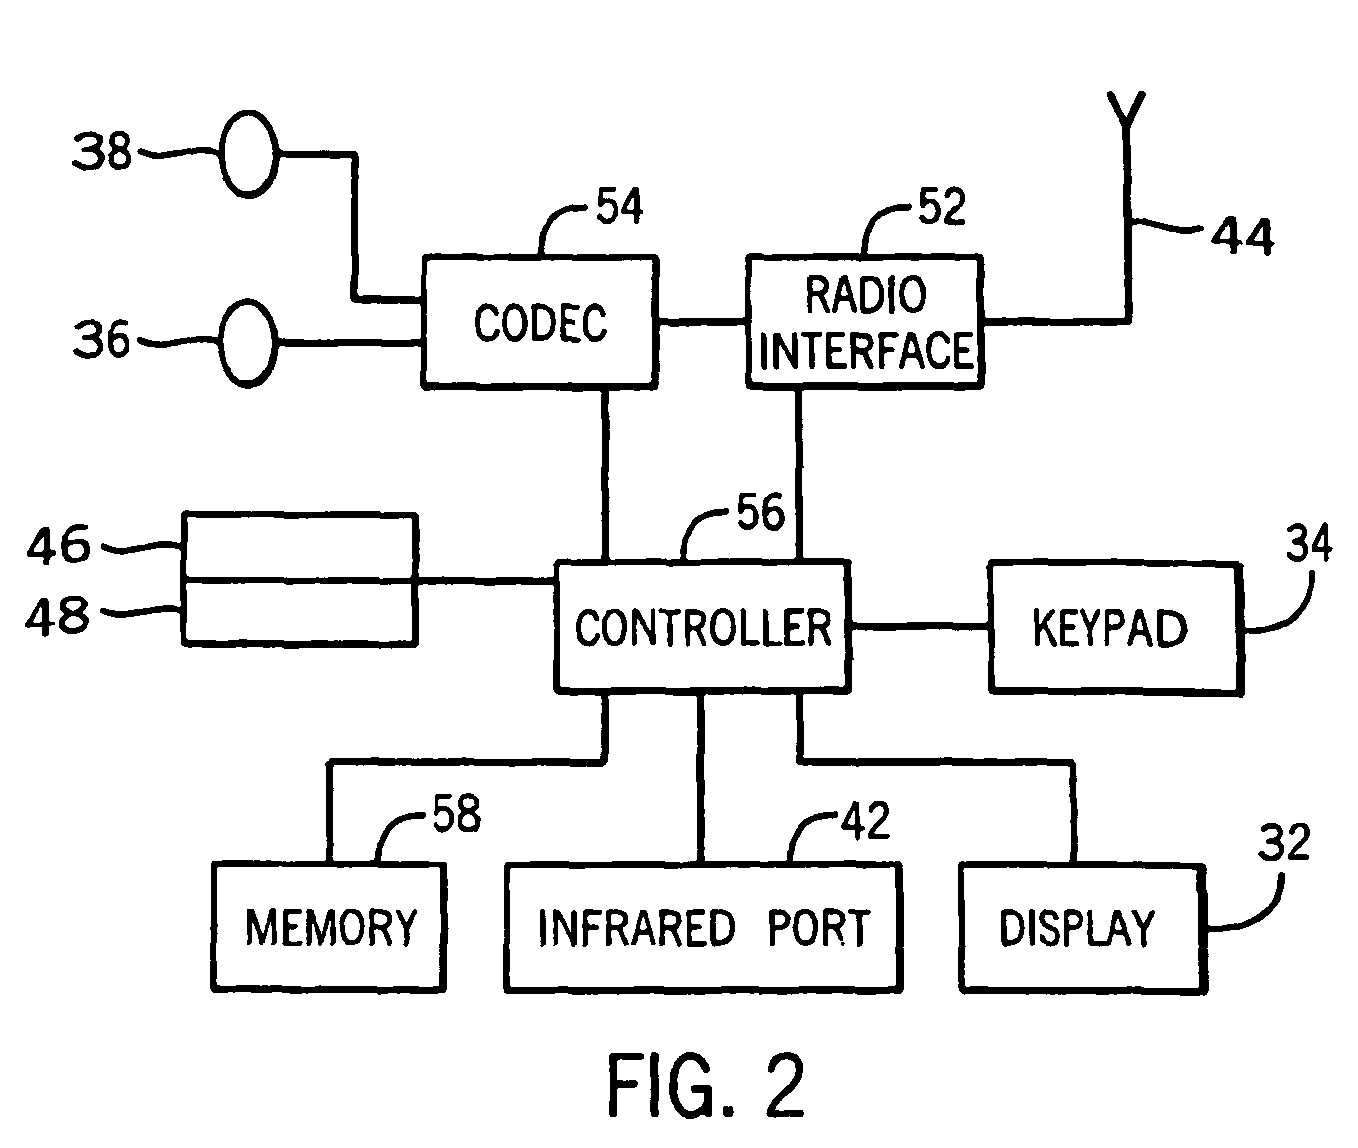 System and method for winding audio content using a voice activity detection algorithm